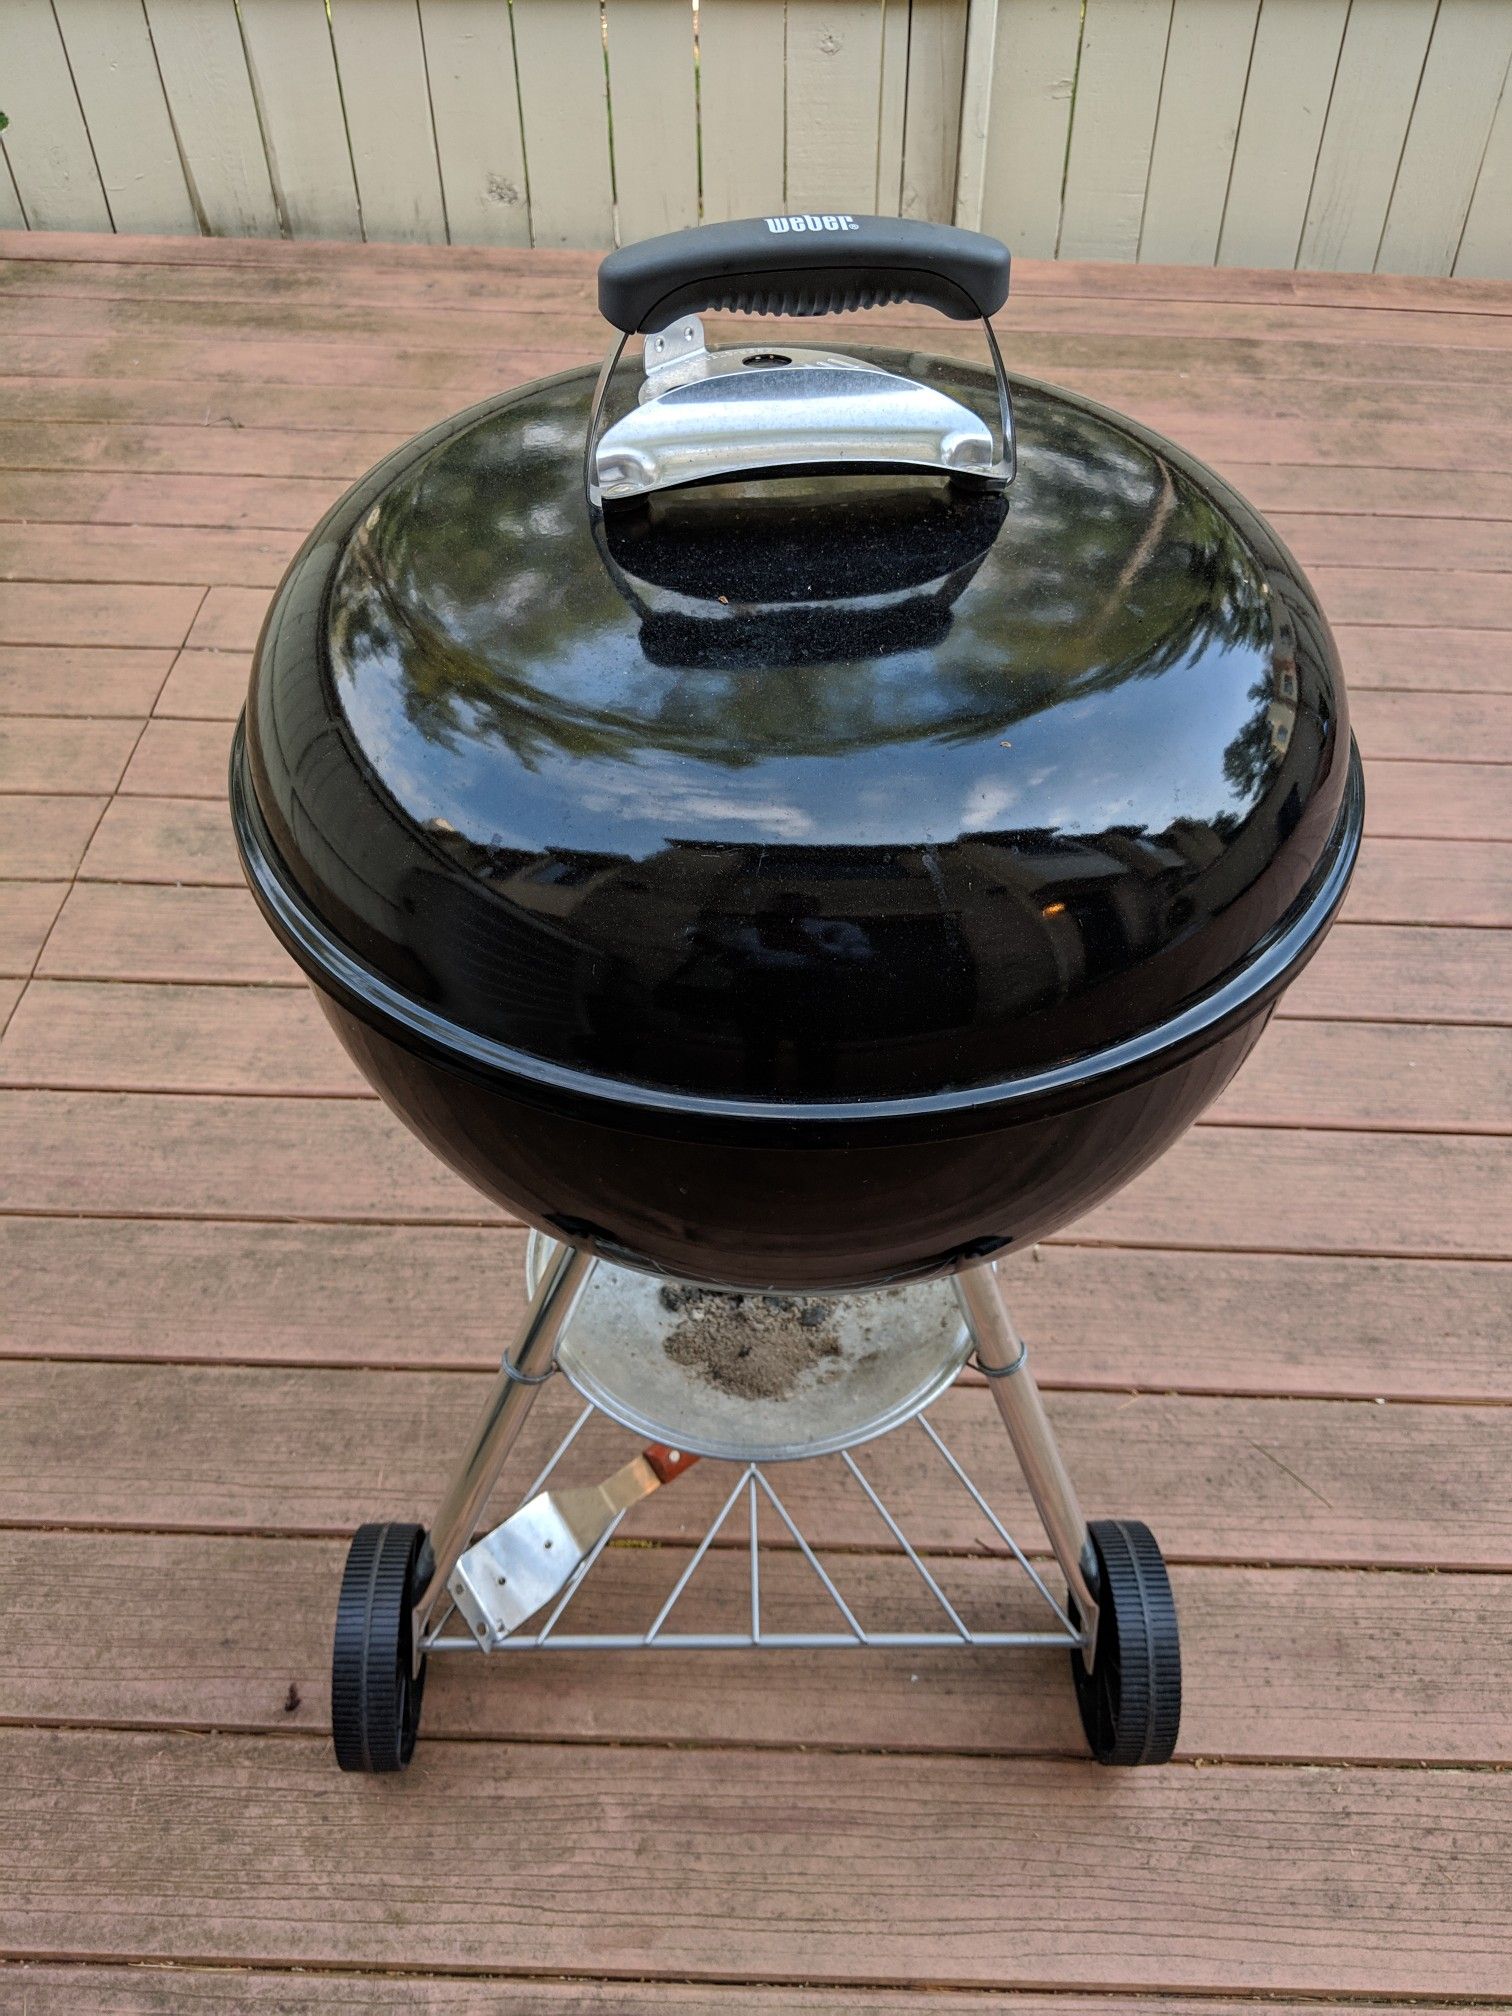 Weber charcoal grill 18 inch